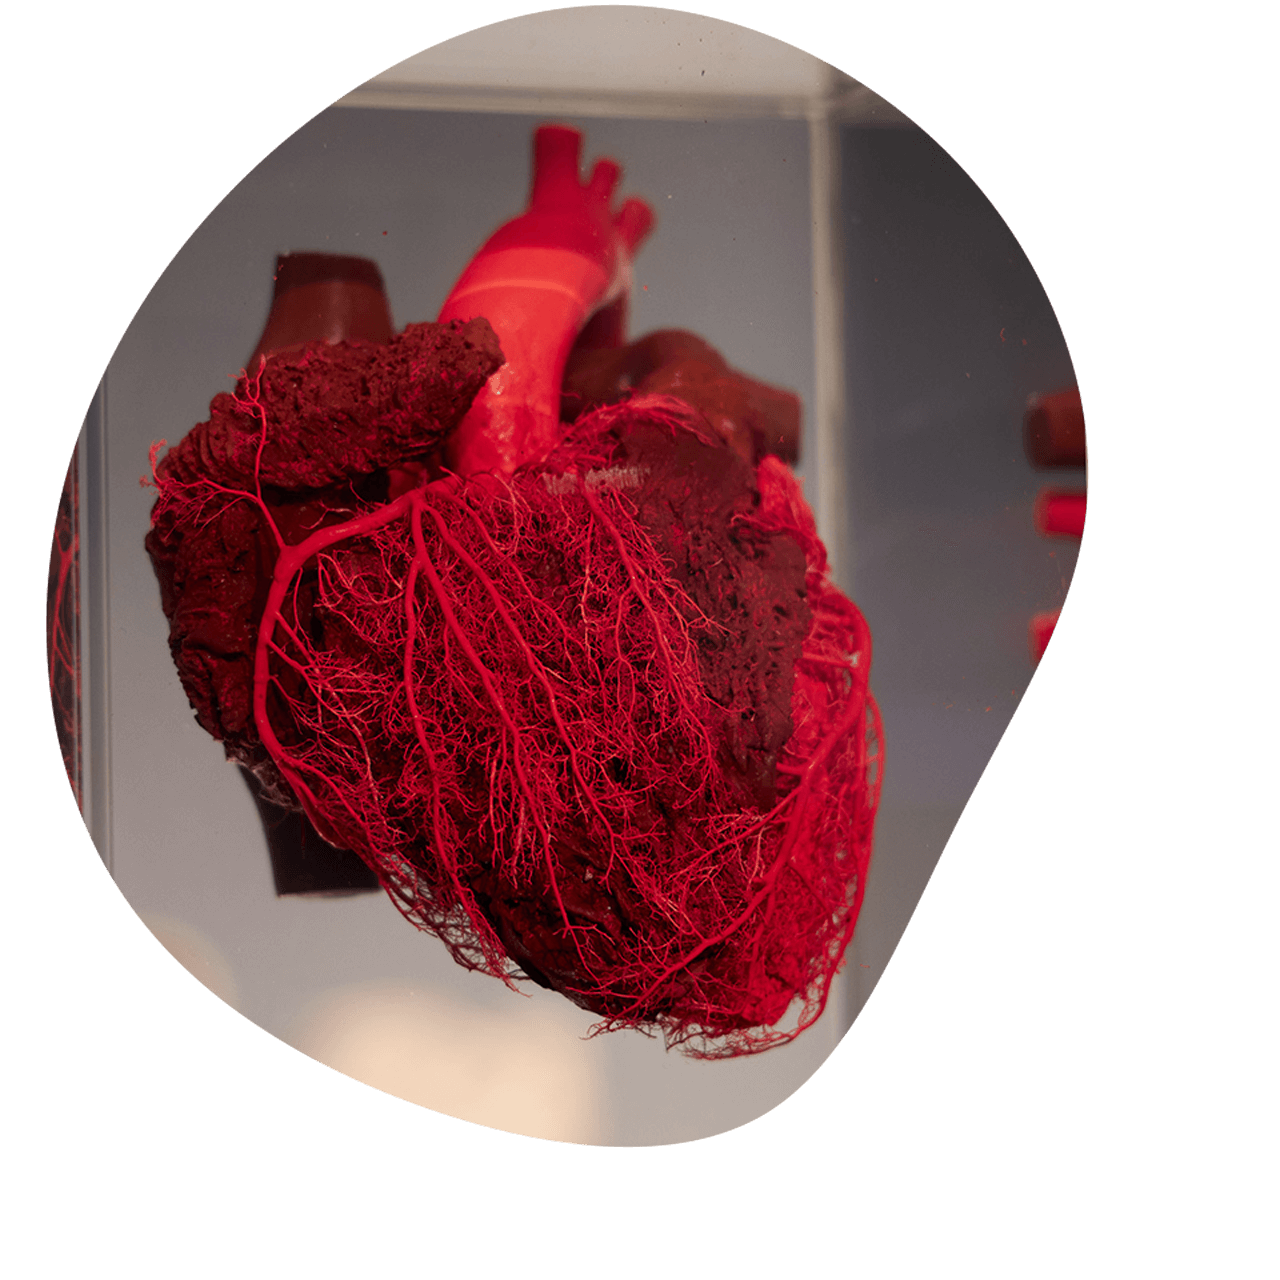 Plastinated human heart with blood vessels from Anatomic Excellence and von Hagens Plastination